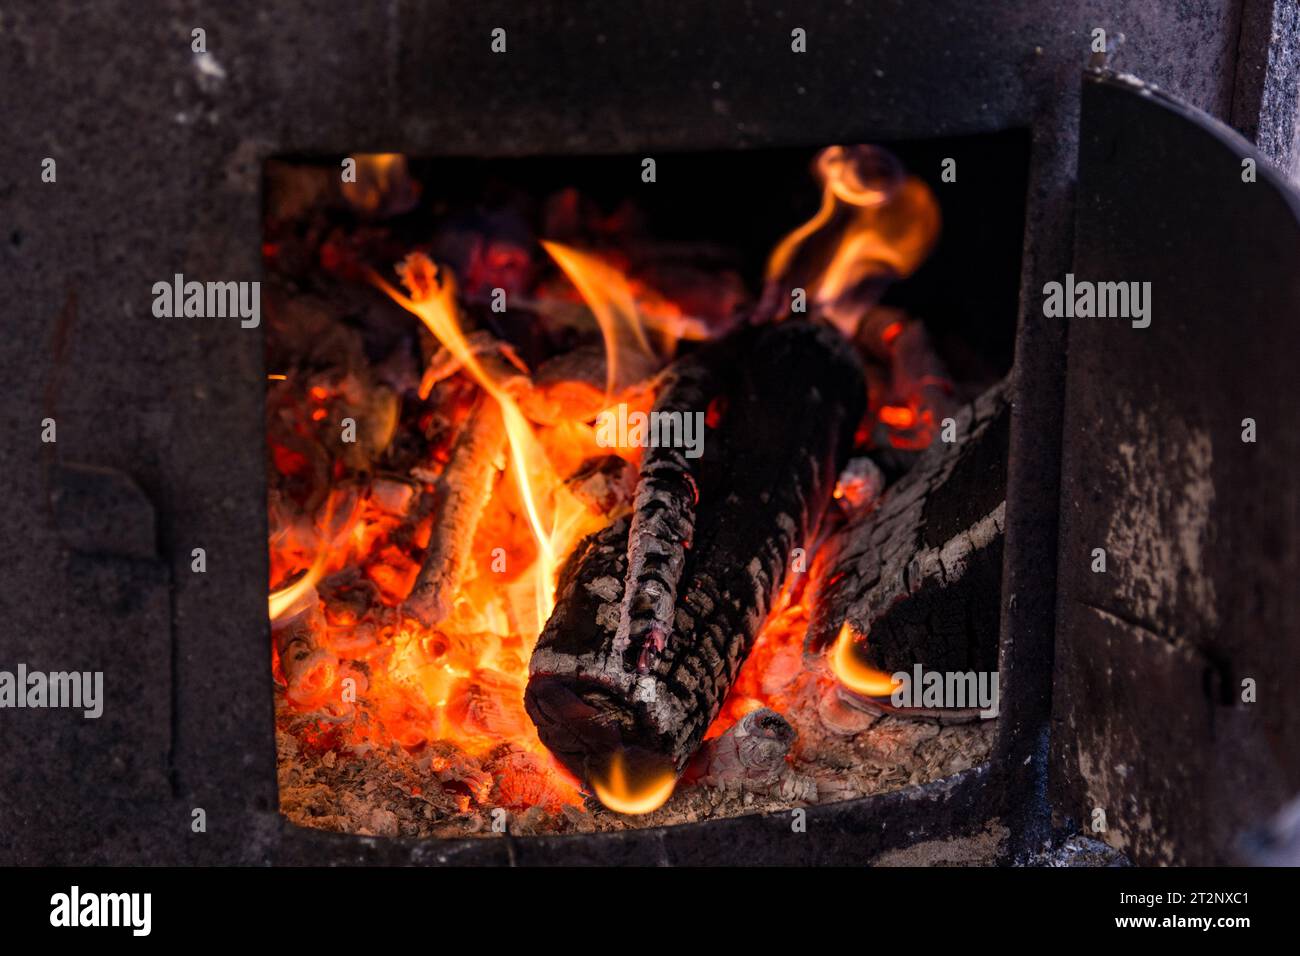 A close up of burning wood in an old stove. The wood is charred and surrounded by red embers and flames Stock Photo